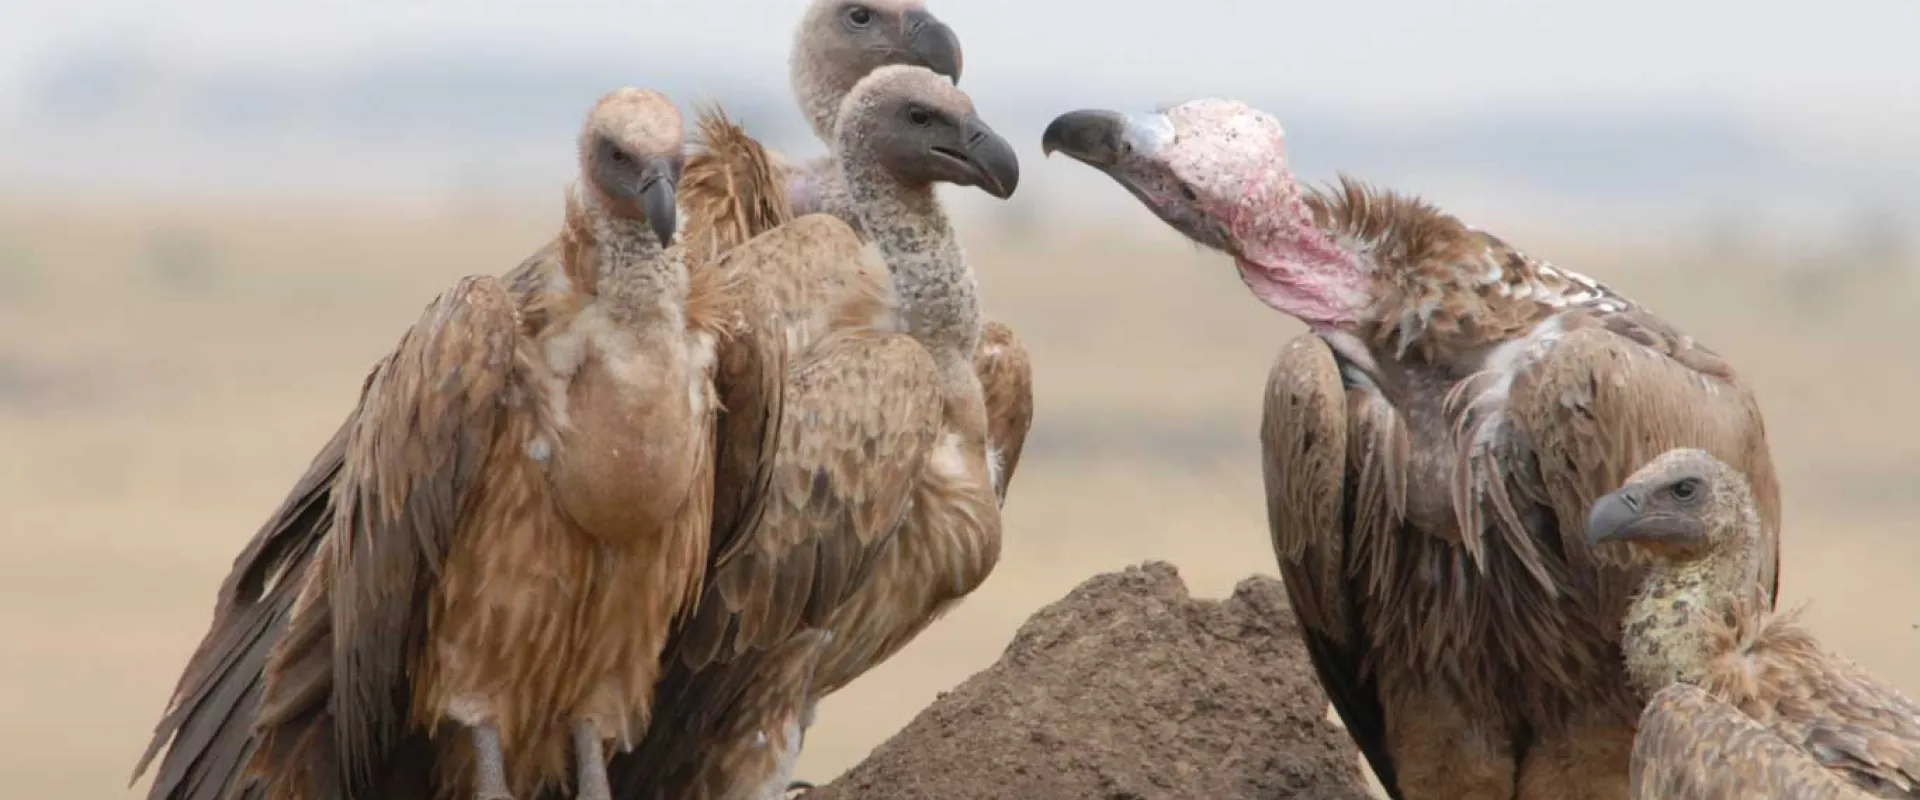 Helping Tanzania’s Vultures Thrive